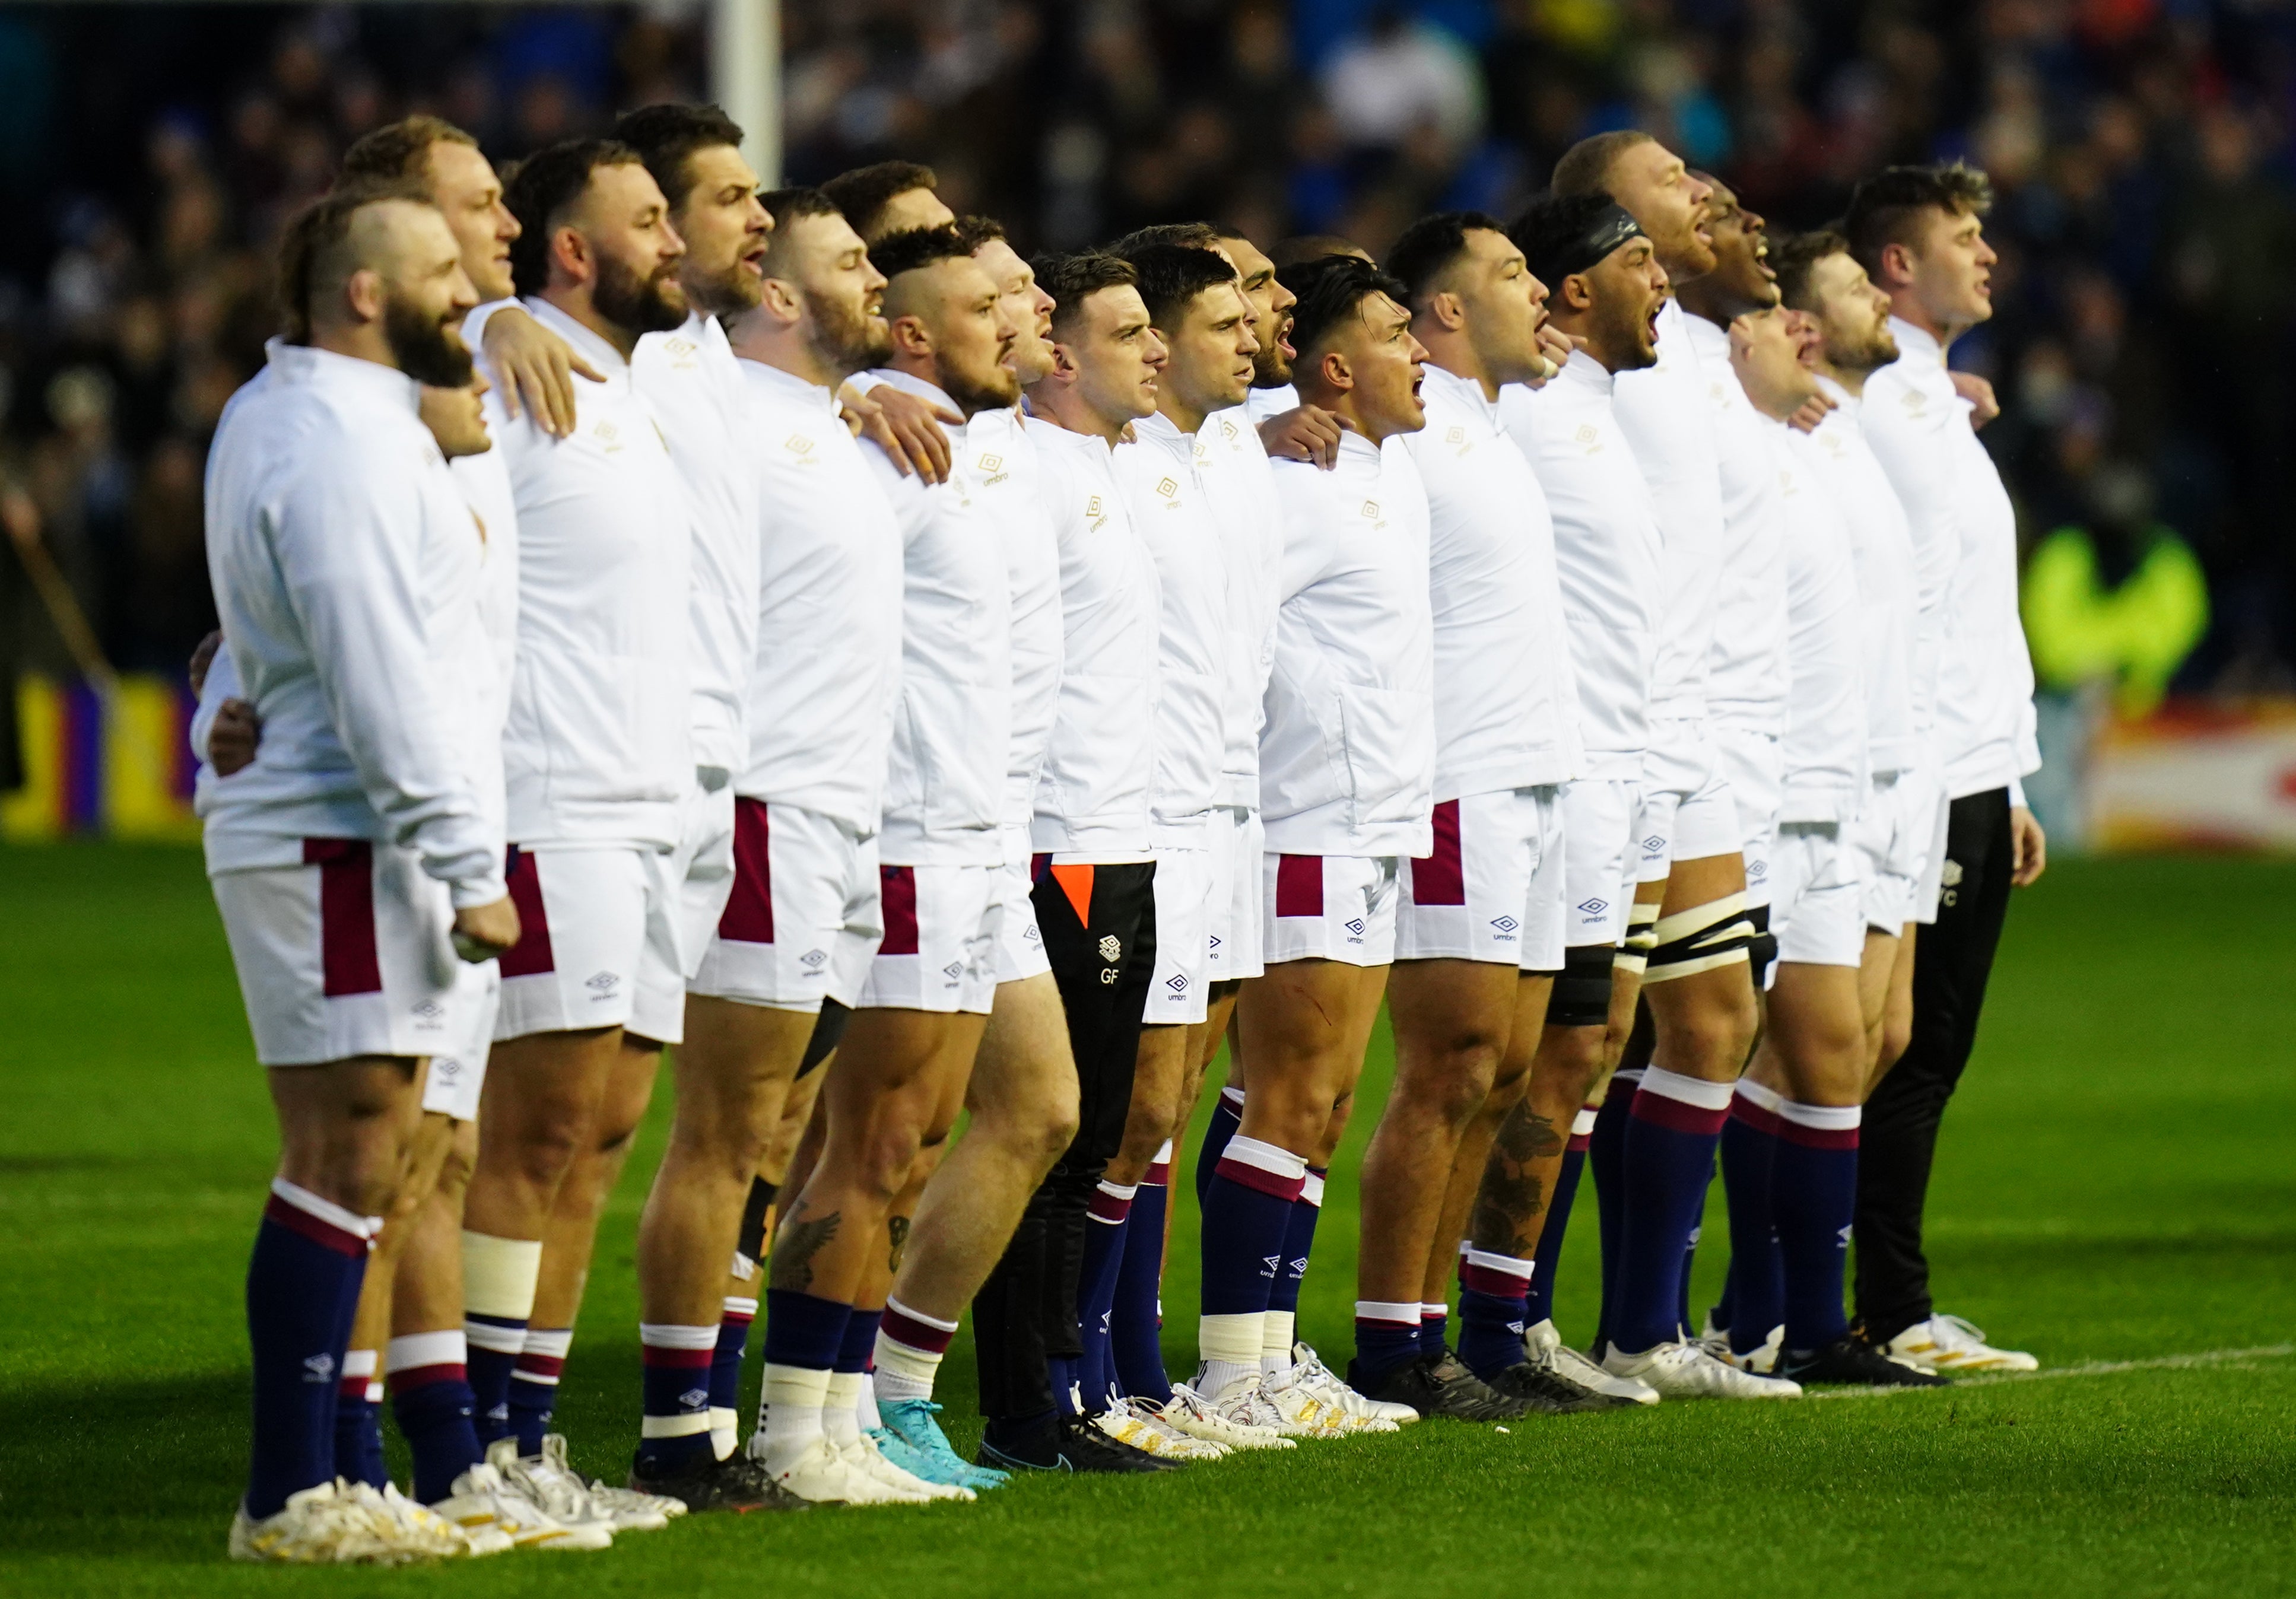 England face Wales in a crunch Six Nations match on Saturday (Jane Barlow/PA)